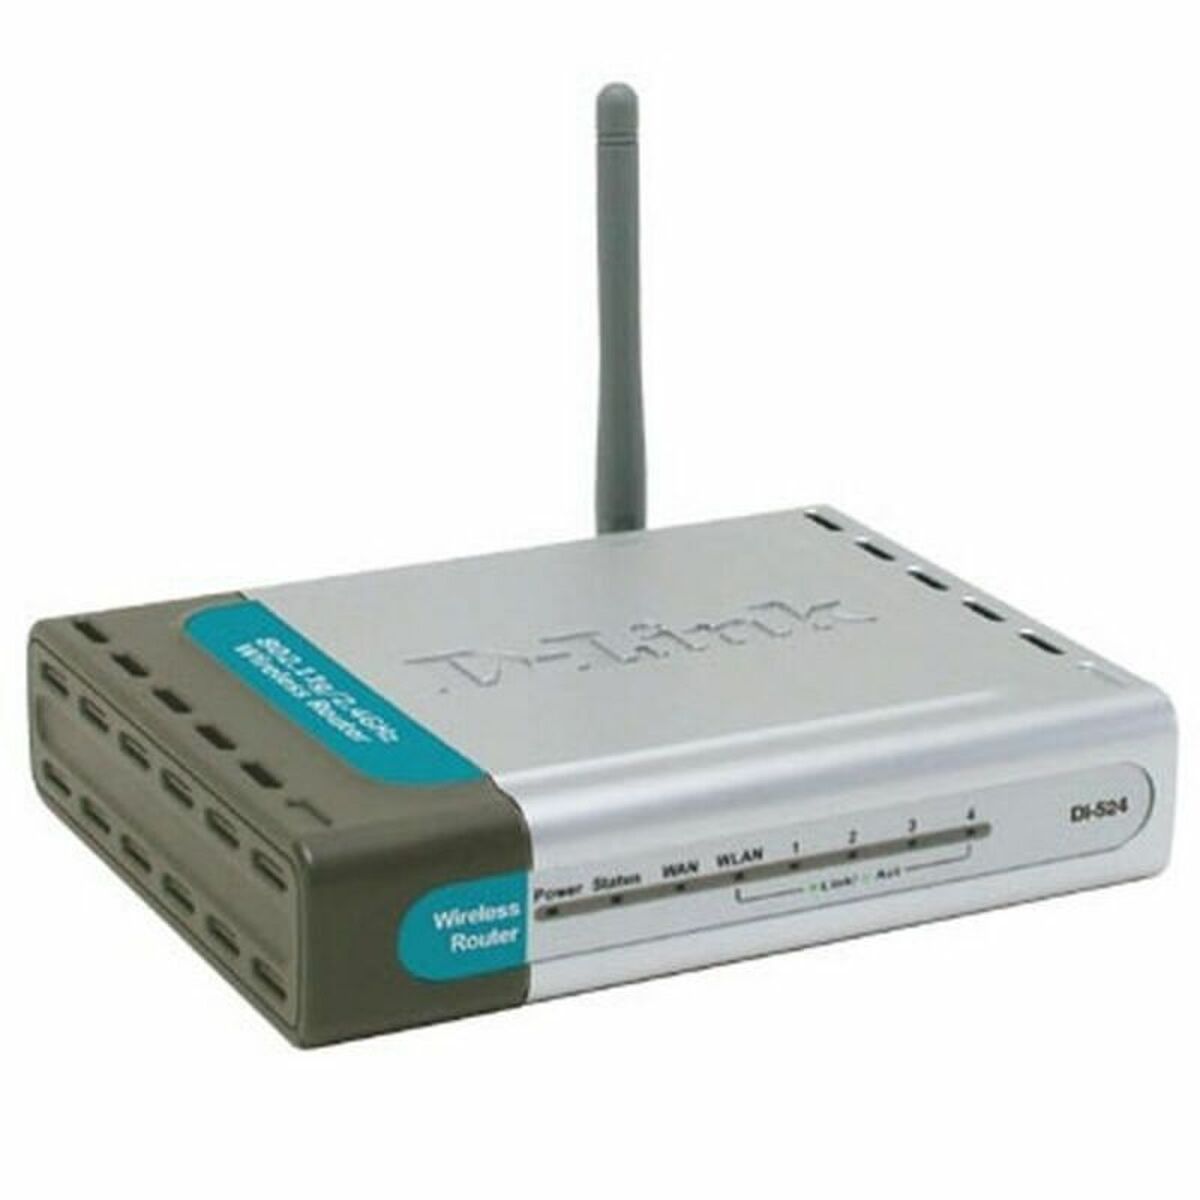 Wireless Modem D-Link DI-524/E, D-Link, Computing, Network devices, wireless-modem-d-link-di-524-e, Brand_D-Link, category-reference-2609, category-reference-2803, category-reference-2826, category-reference-t-19685, category-reference-t-19914, Condition_NEW, networks/wiring, Price_50 - 100, RiotNook